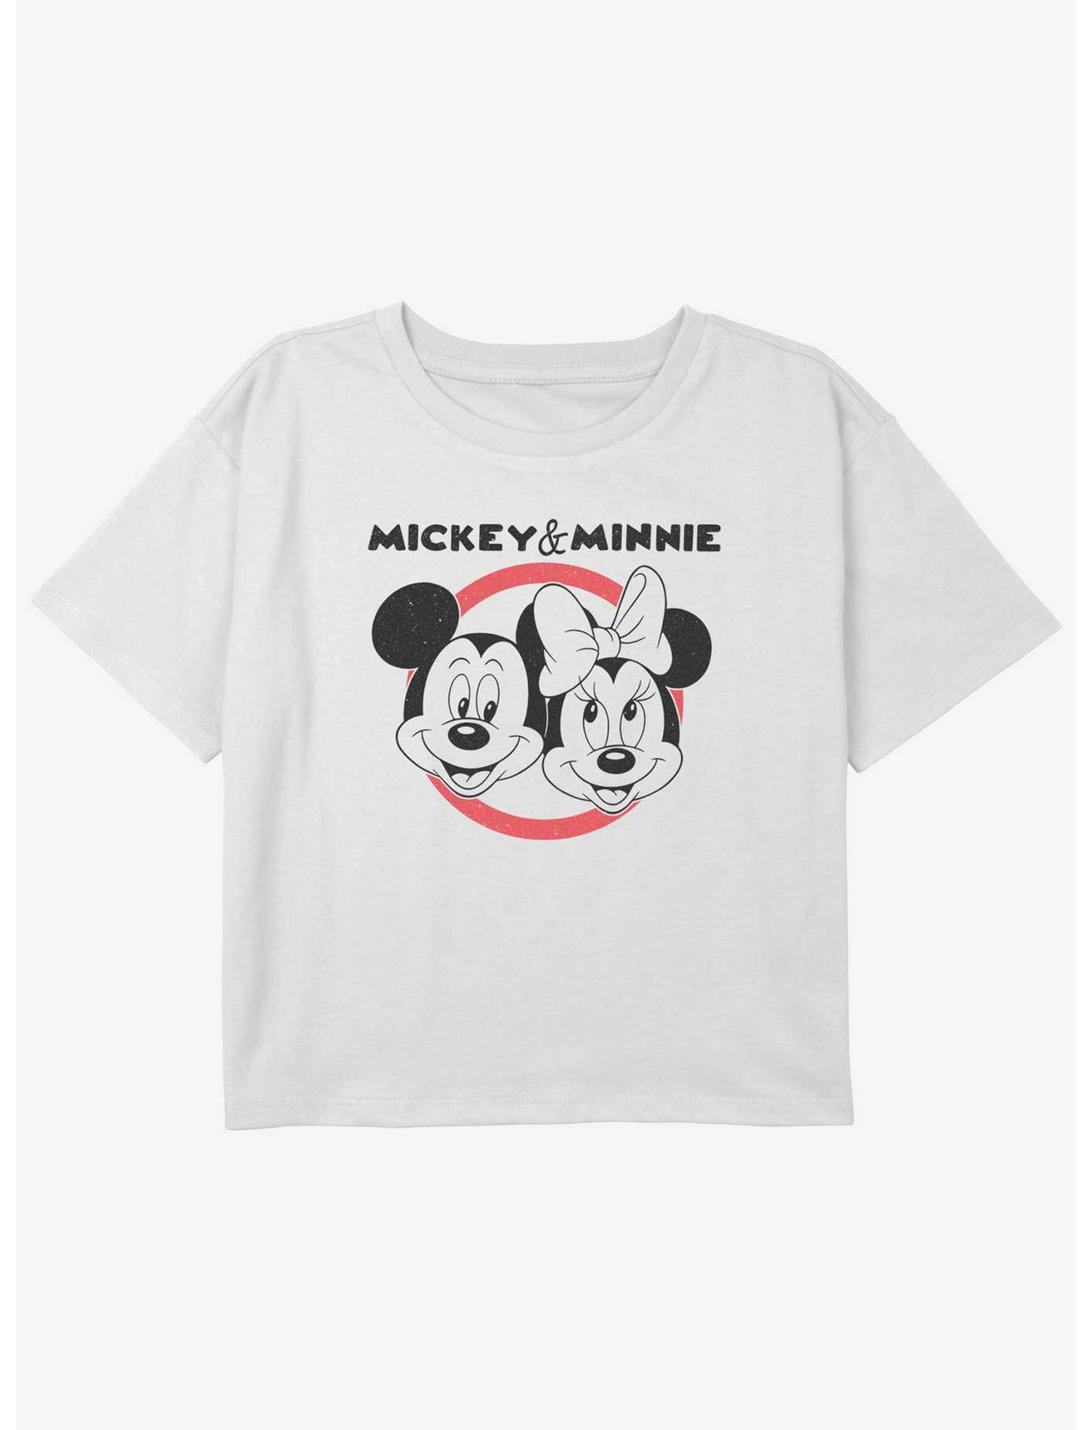 Disney Mickey Mouse Mickey & Minnie Girls Youth Crop T-Shirt, WHITE, hi-res